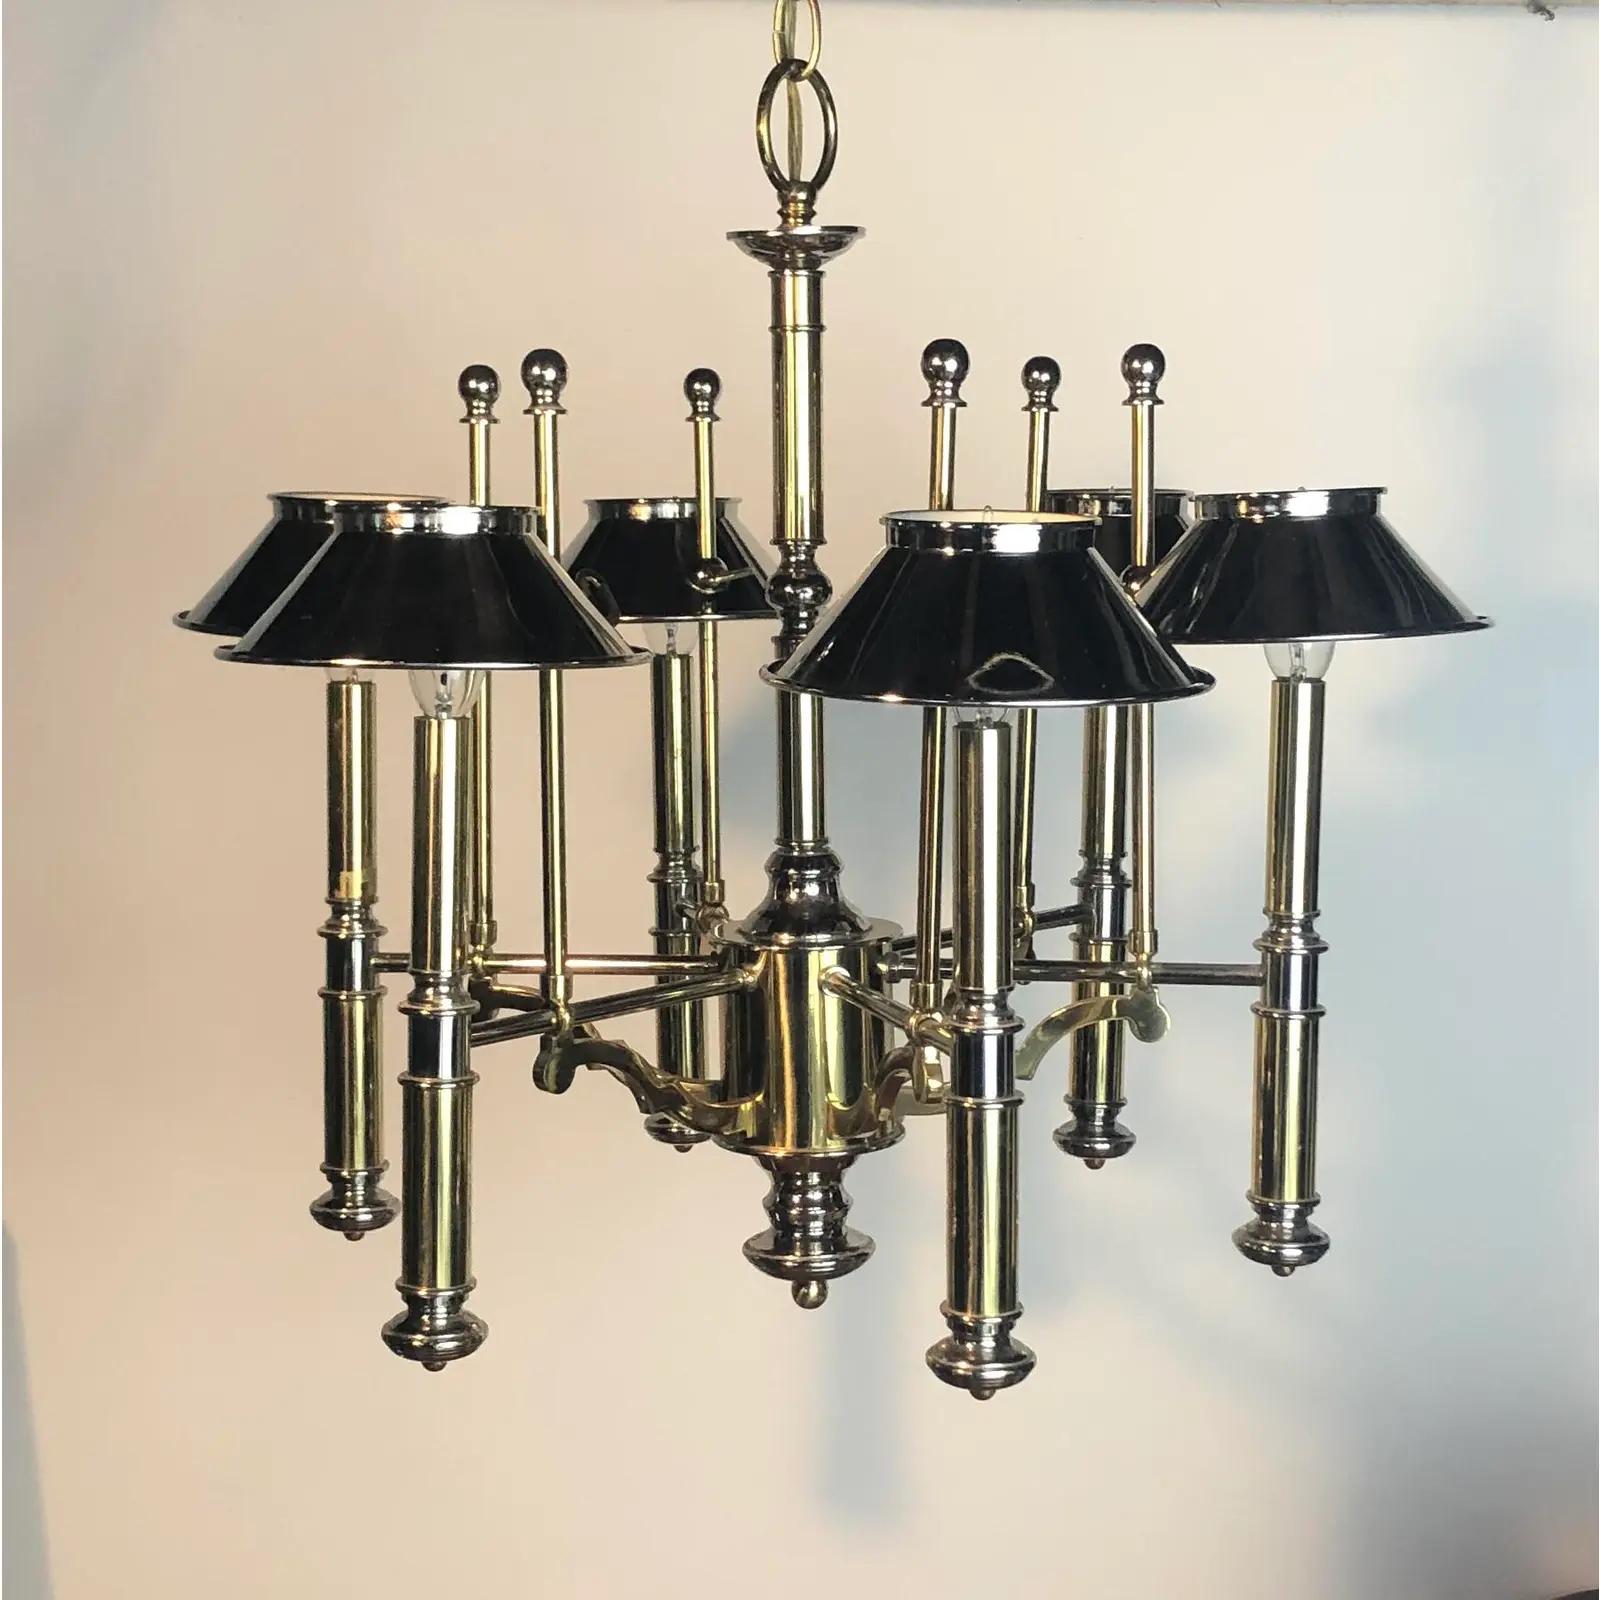 Beautiful mixed metal Bouillotte Chandelier by Lightolier. Brass and chrome a perfect balance. 6 light with adjustable chrome canopies.
Curbside to NYC/Philly $350